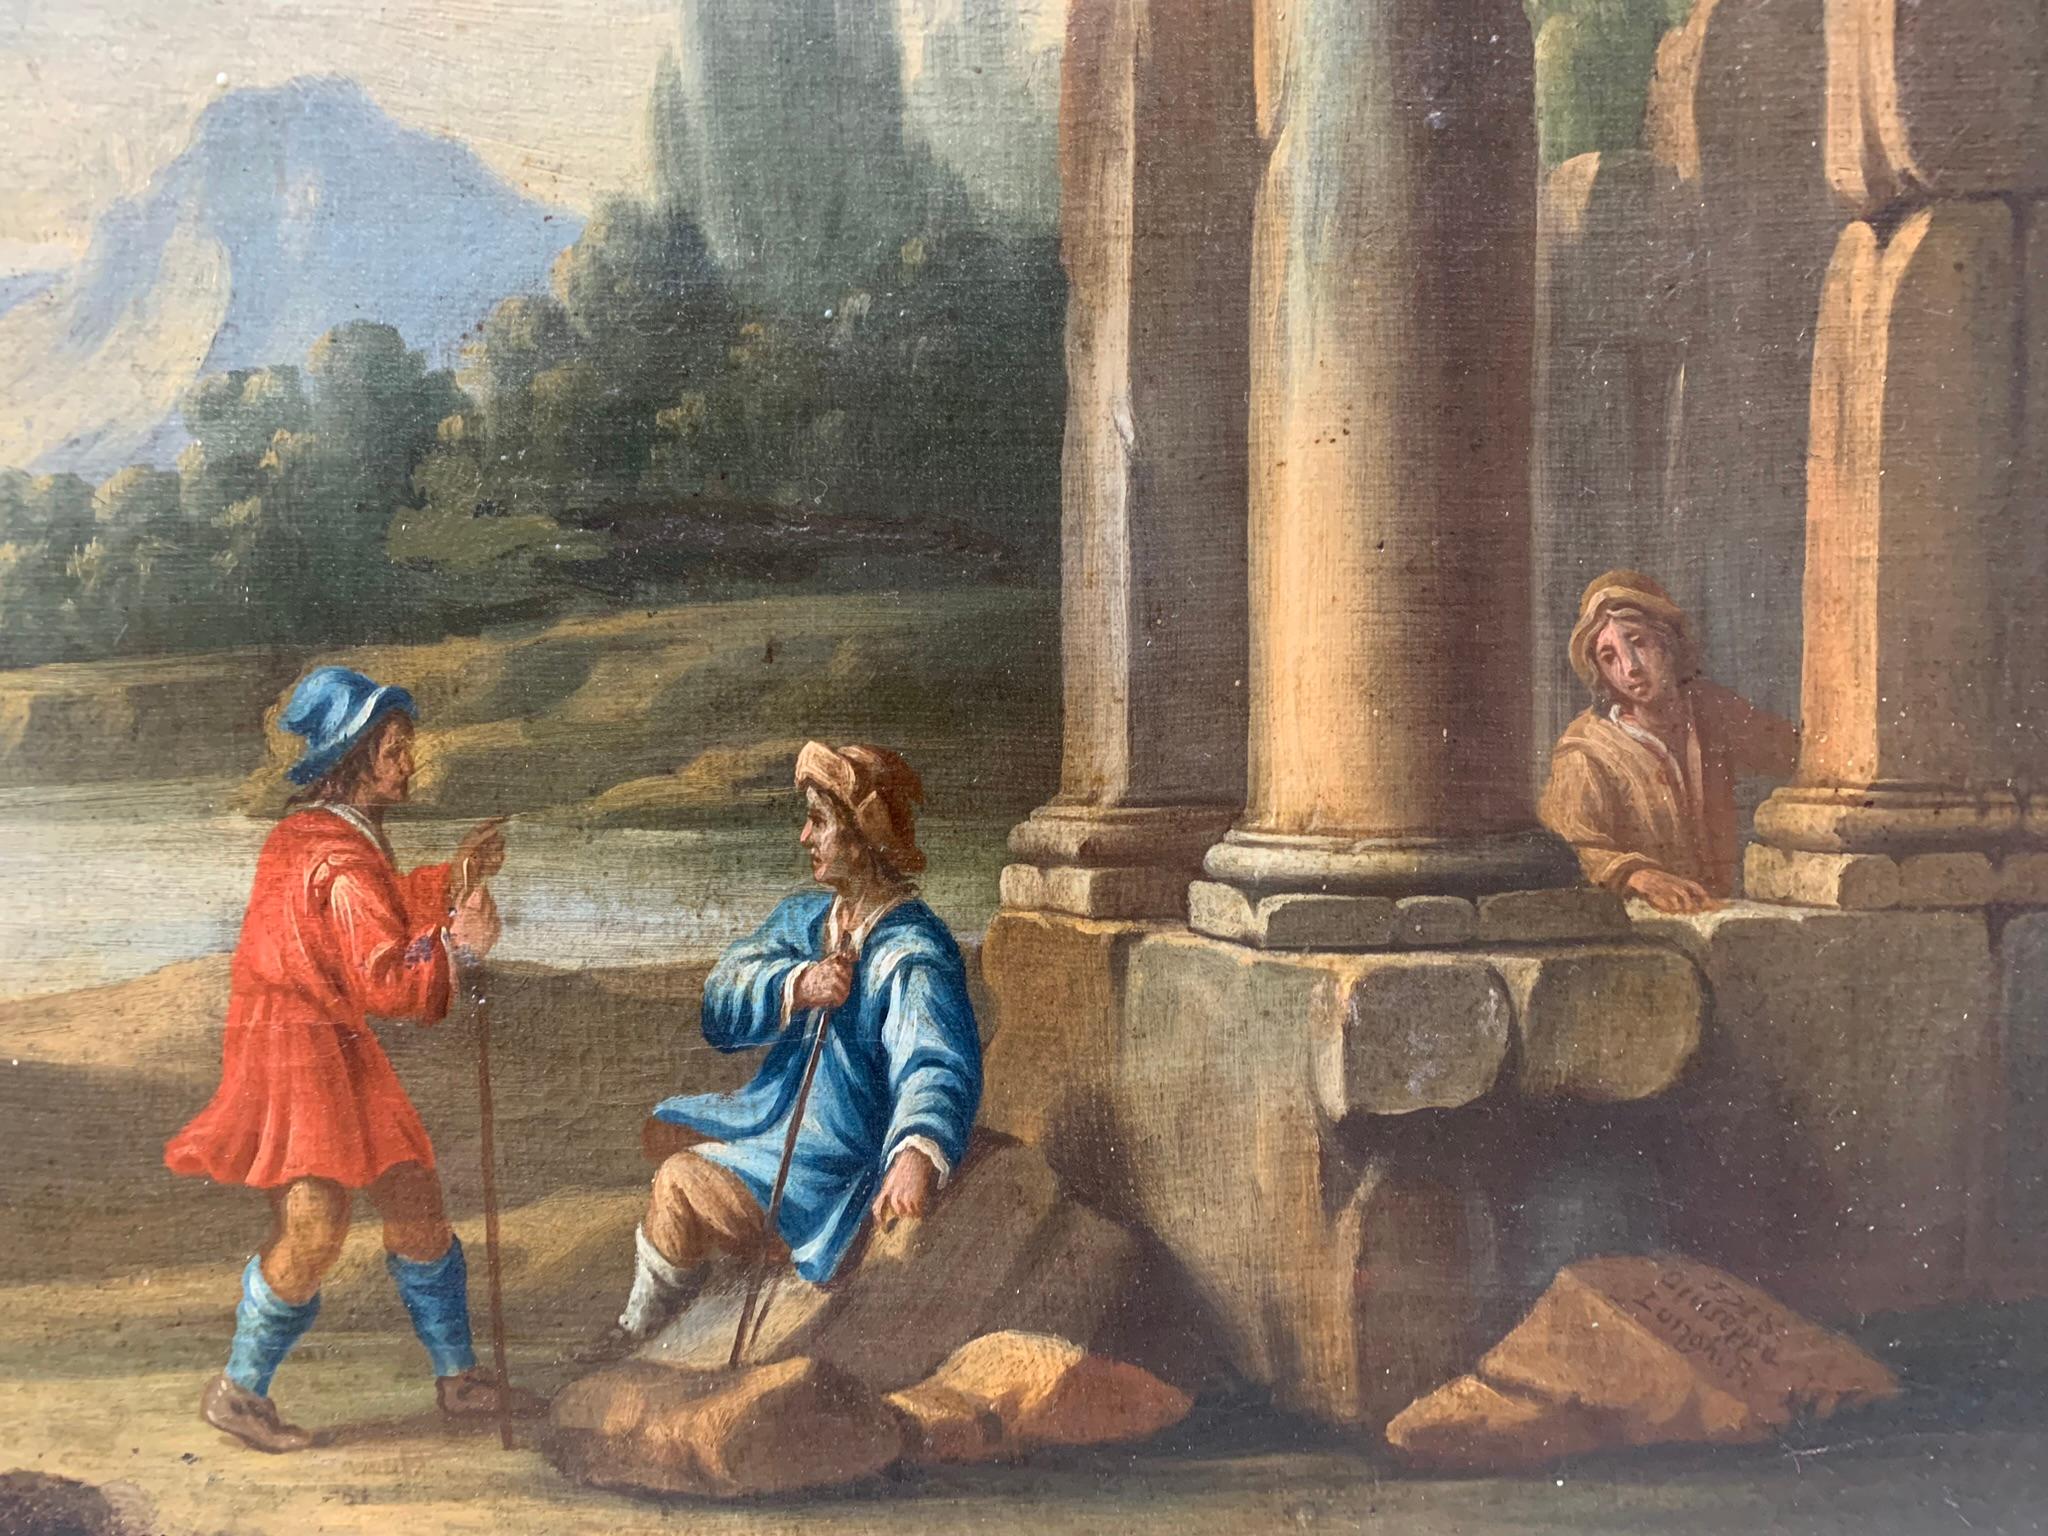 Roman school.
Paining with the ruins of a large building from Ancient Rome, columns and the river valley.
Signed on a triangular stone resting on the ground, near the Doric column: Giuseppe Longhi and dated 1718.

Technique: oil on canvas.

Original